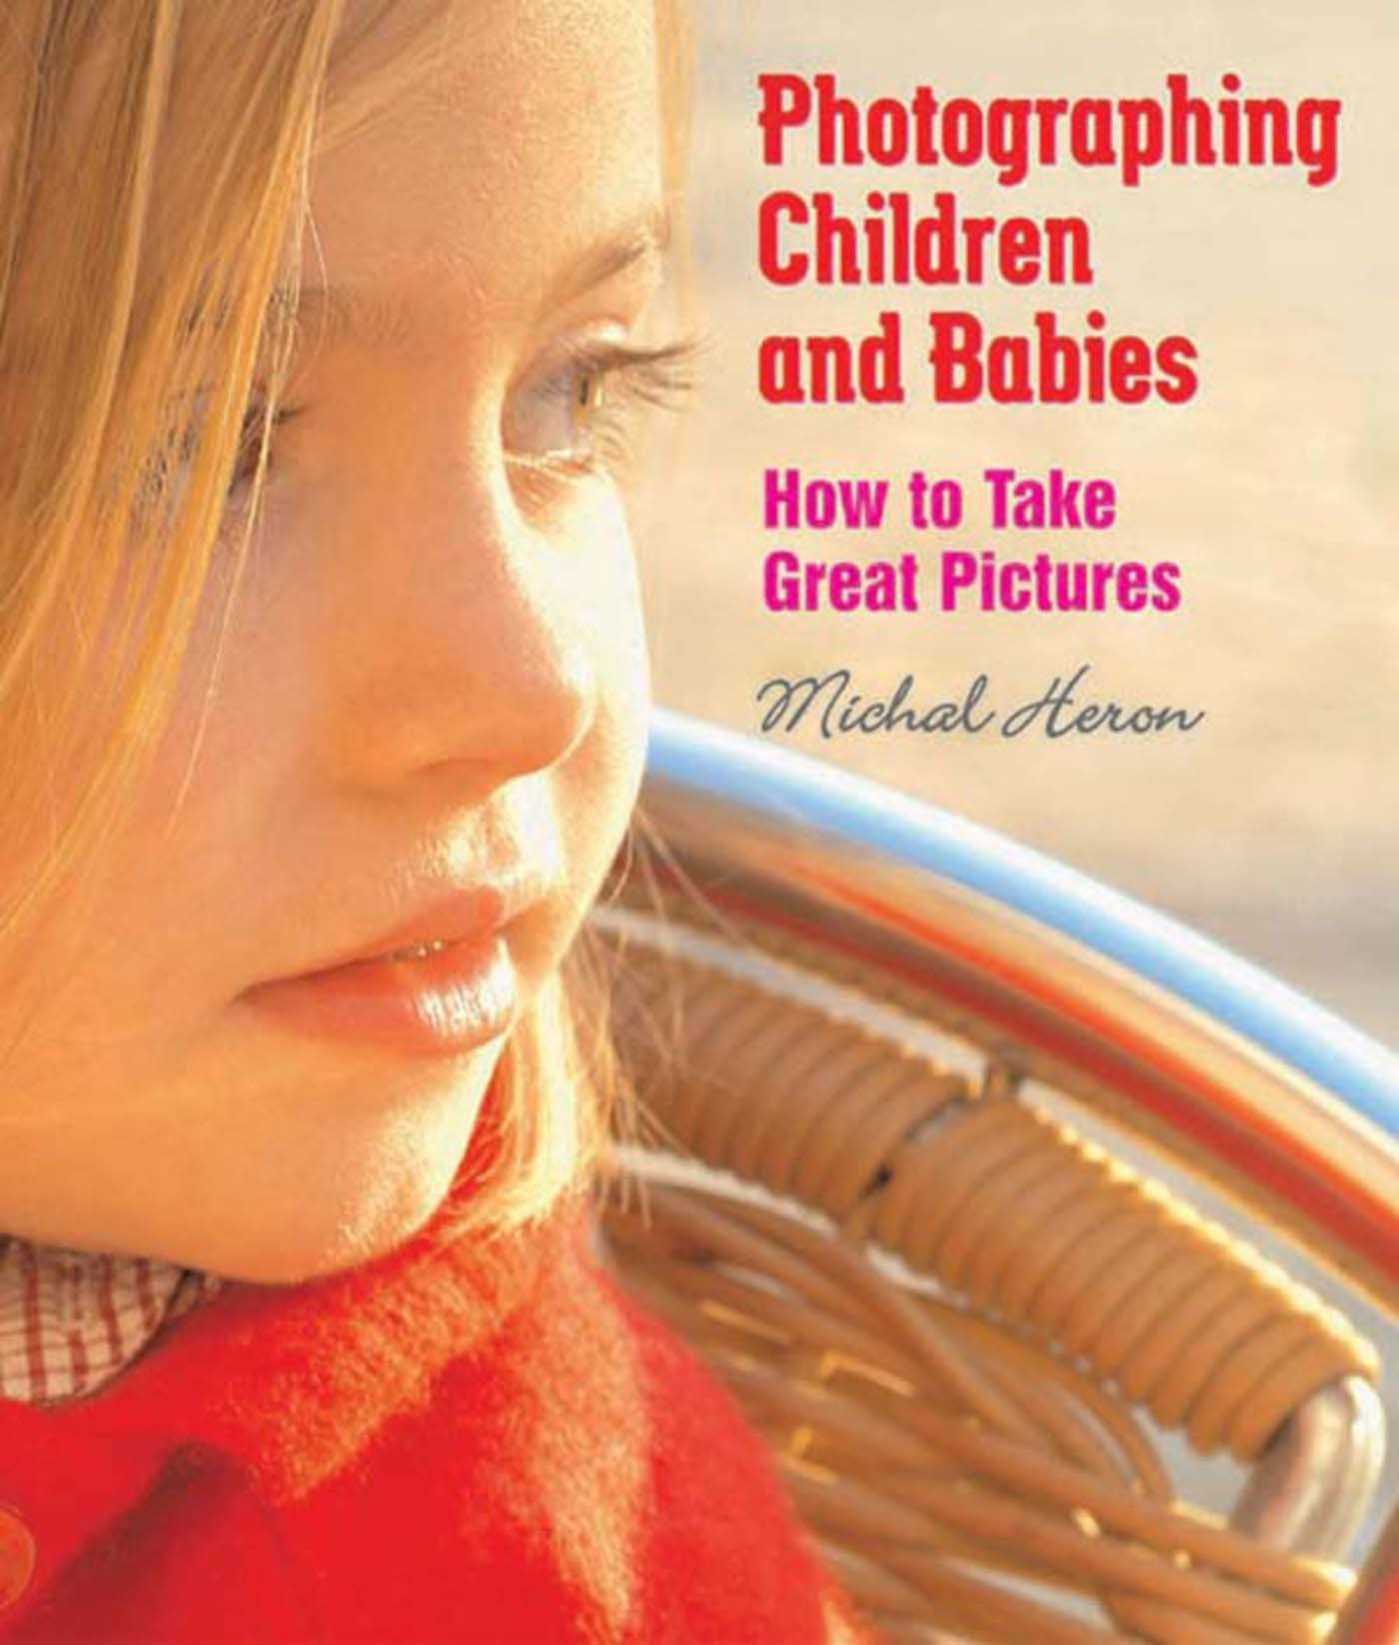 Photographing Children and Babies - 15-24.99